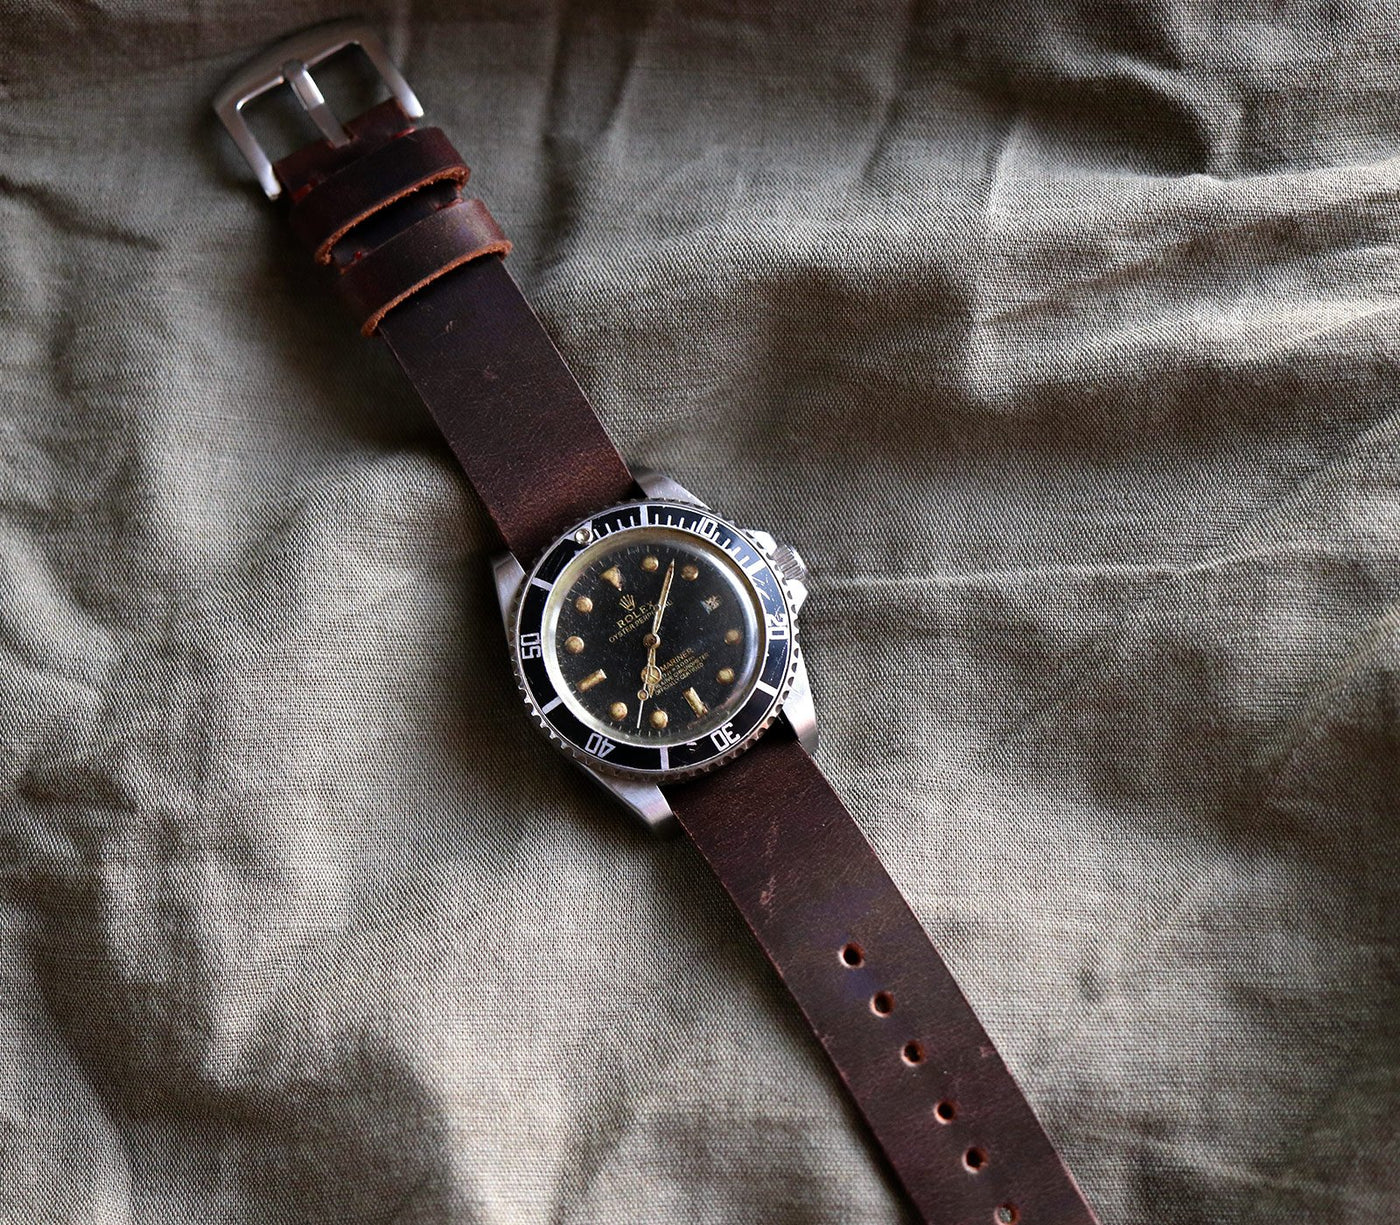 Military Style Leather Watch Strap - Antique Brown